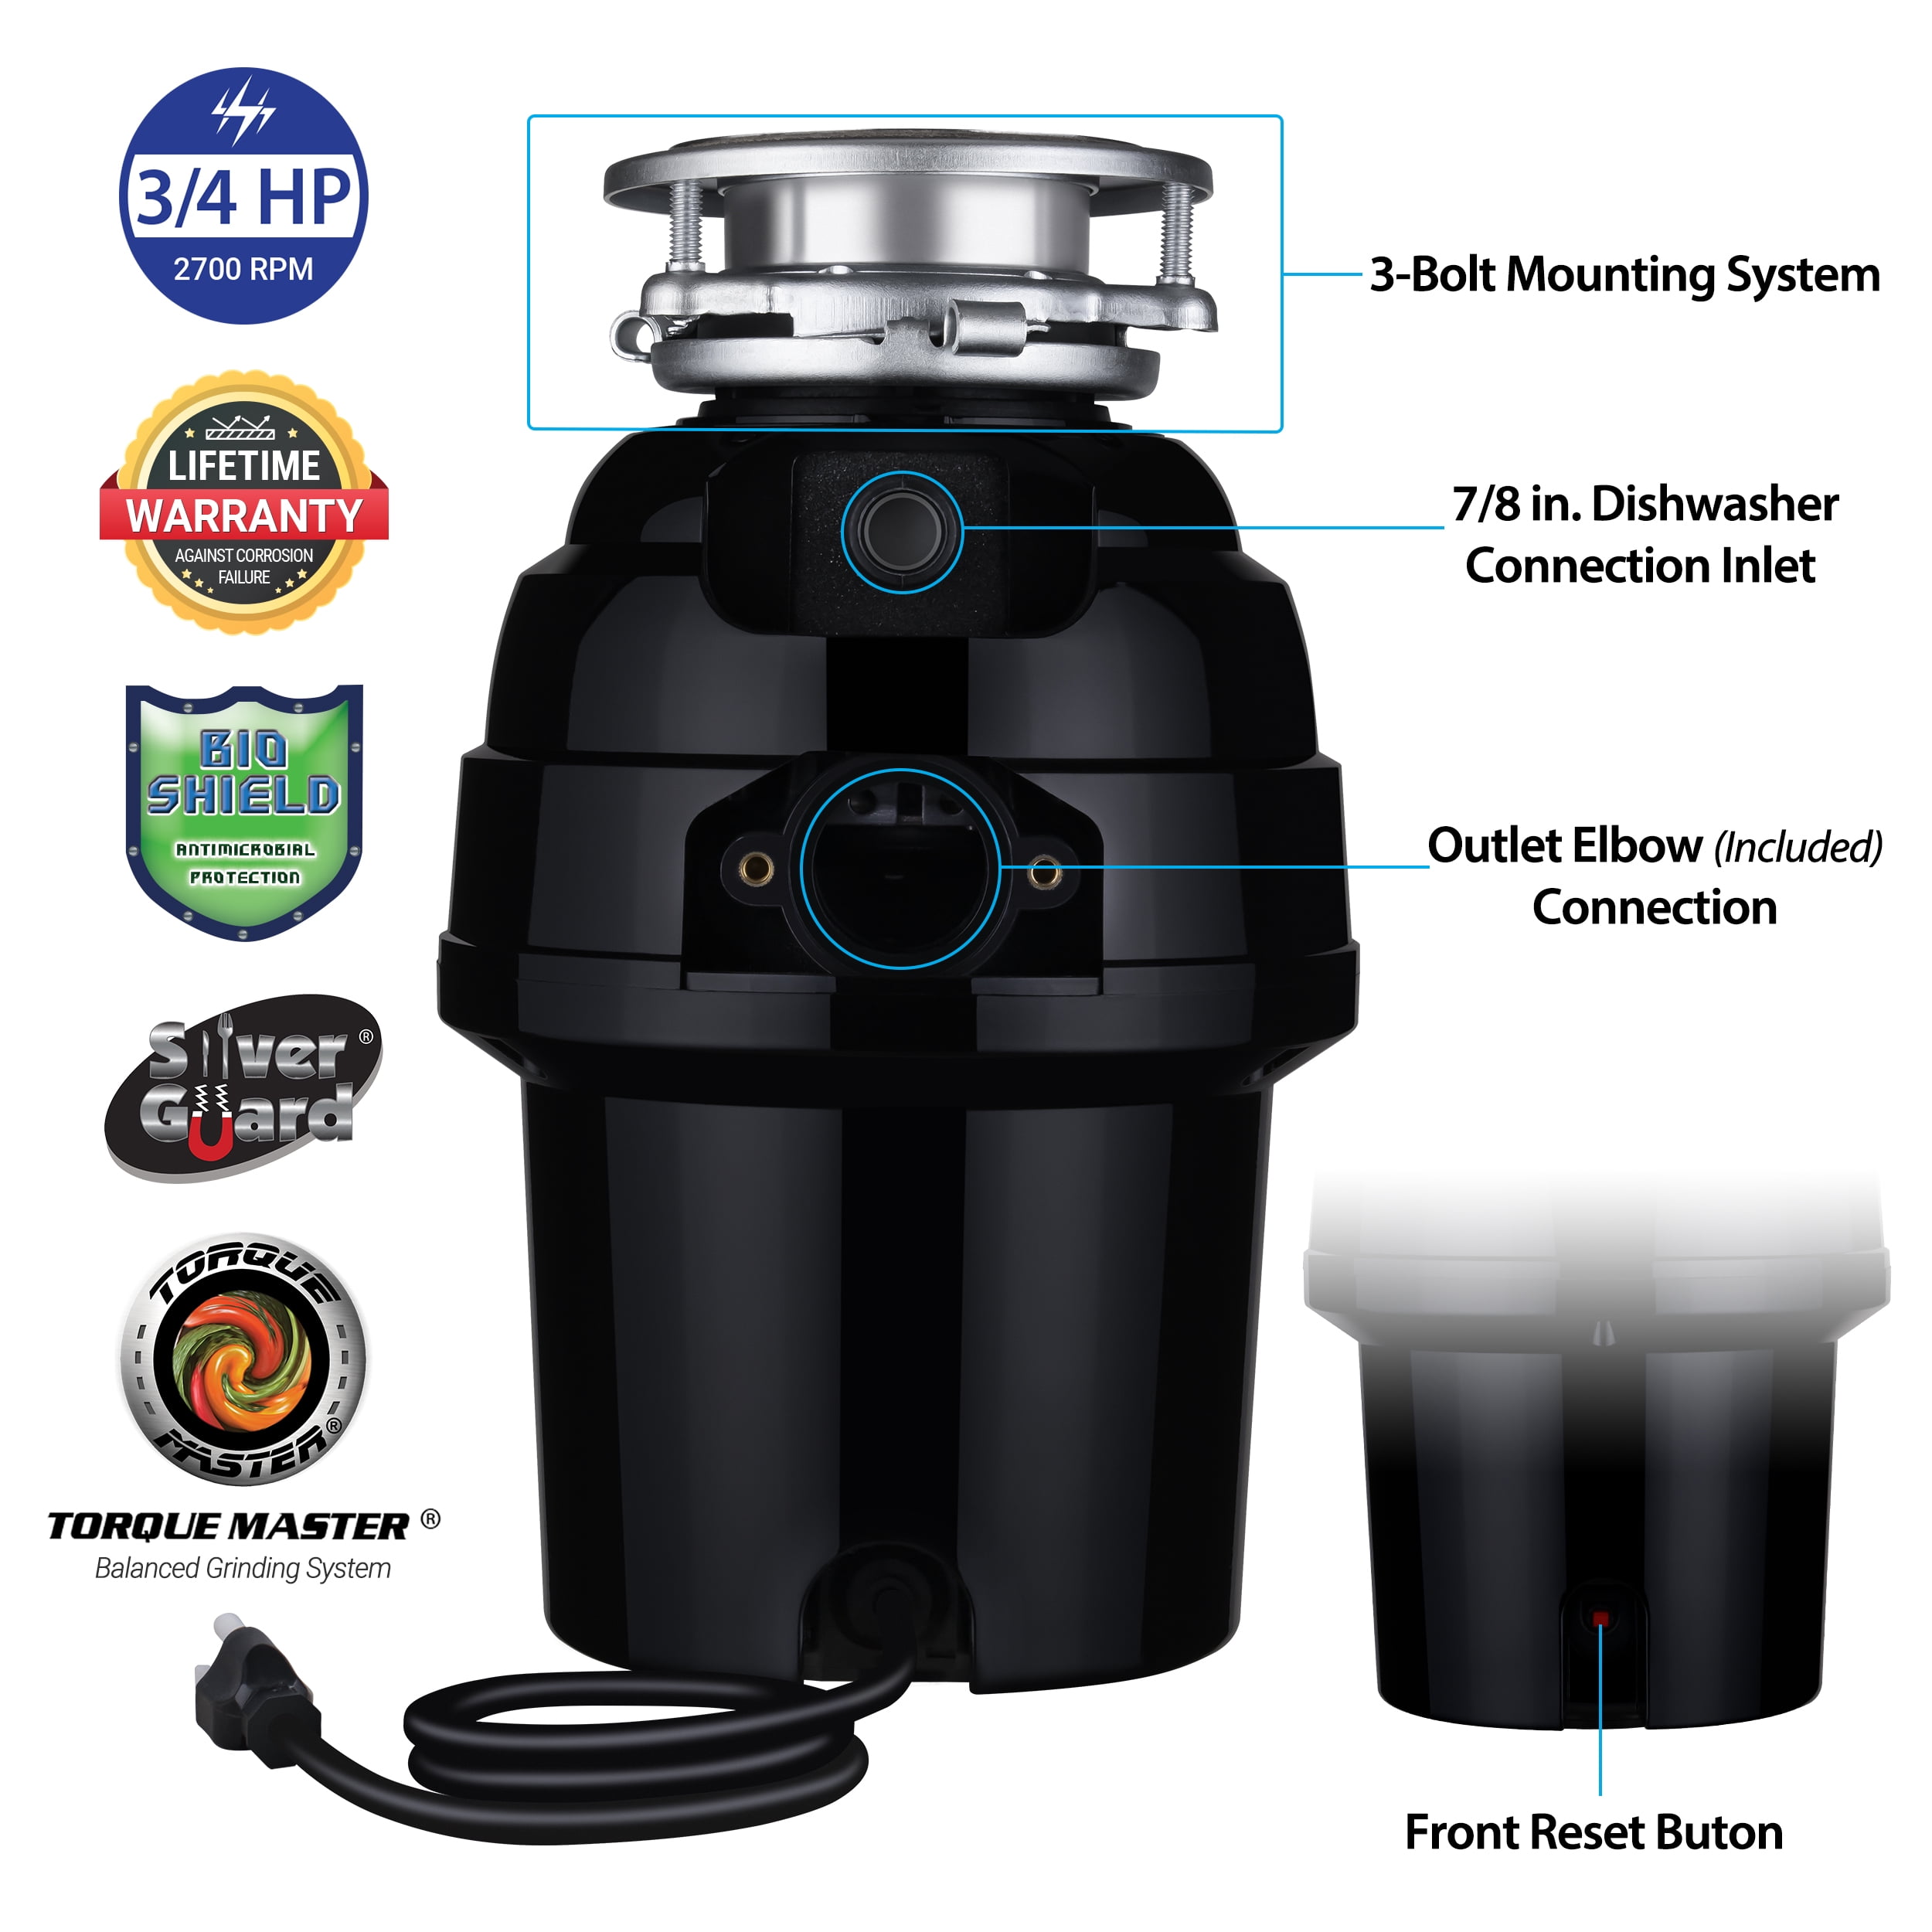 Need Garbage Disposal Upgrade. Top InSinkErator Models to Consider in 2023